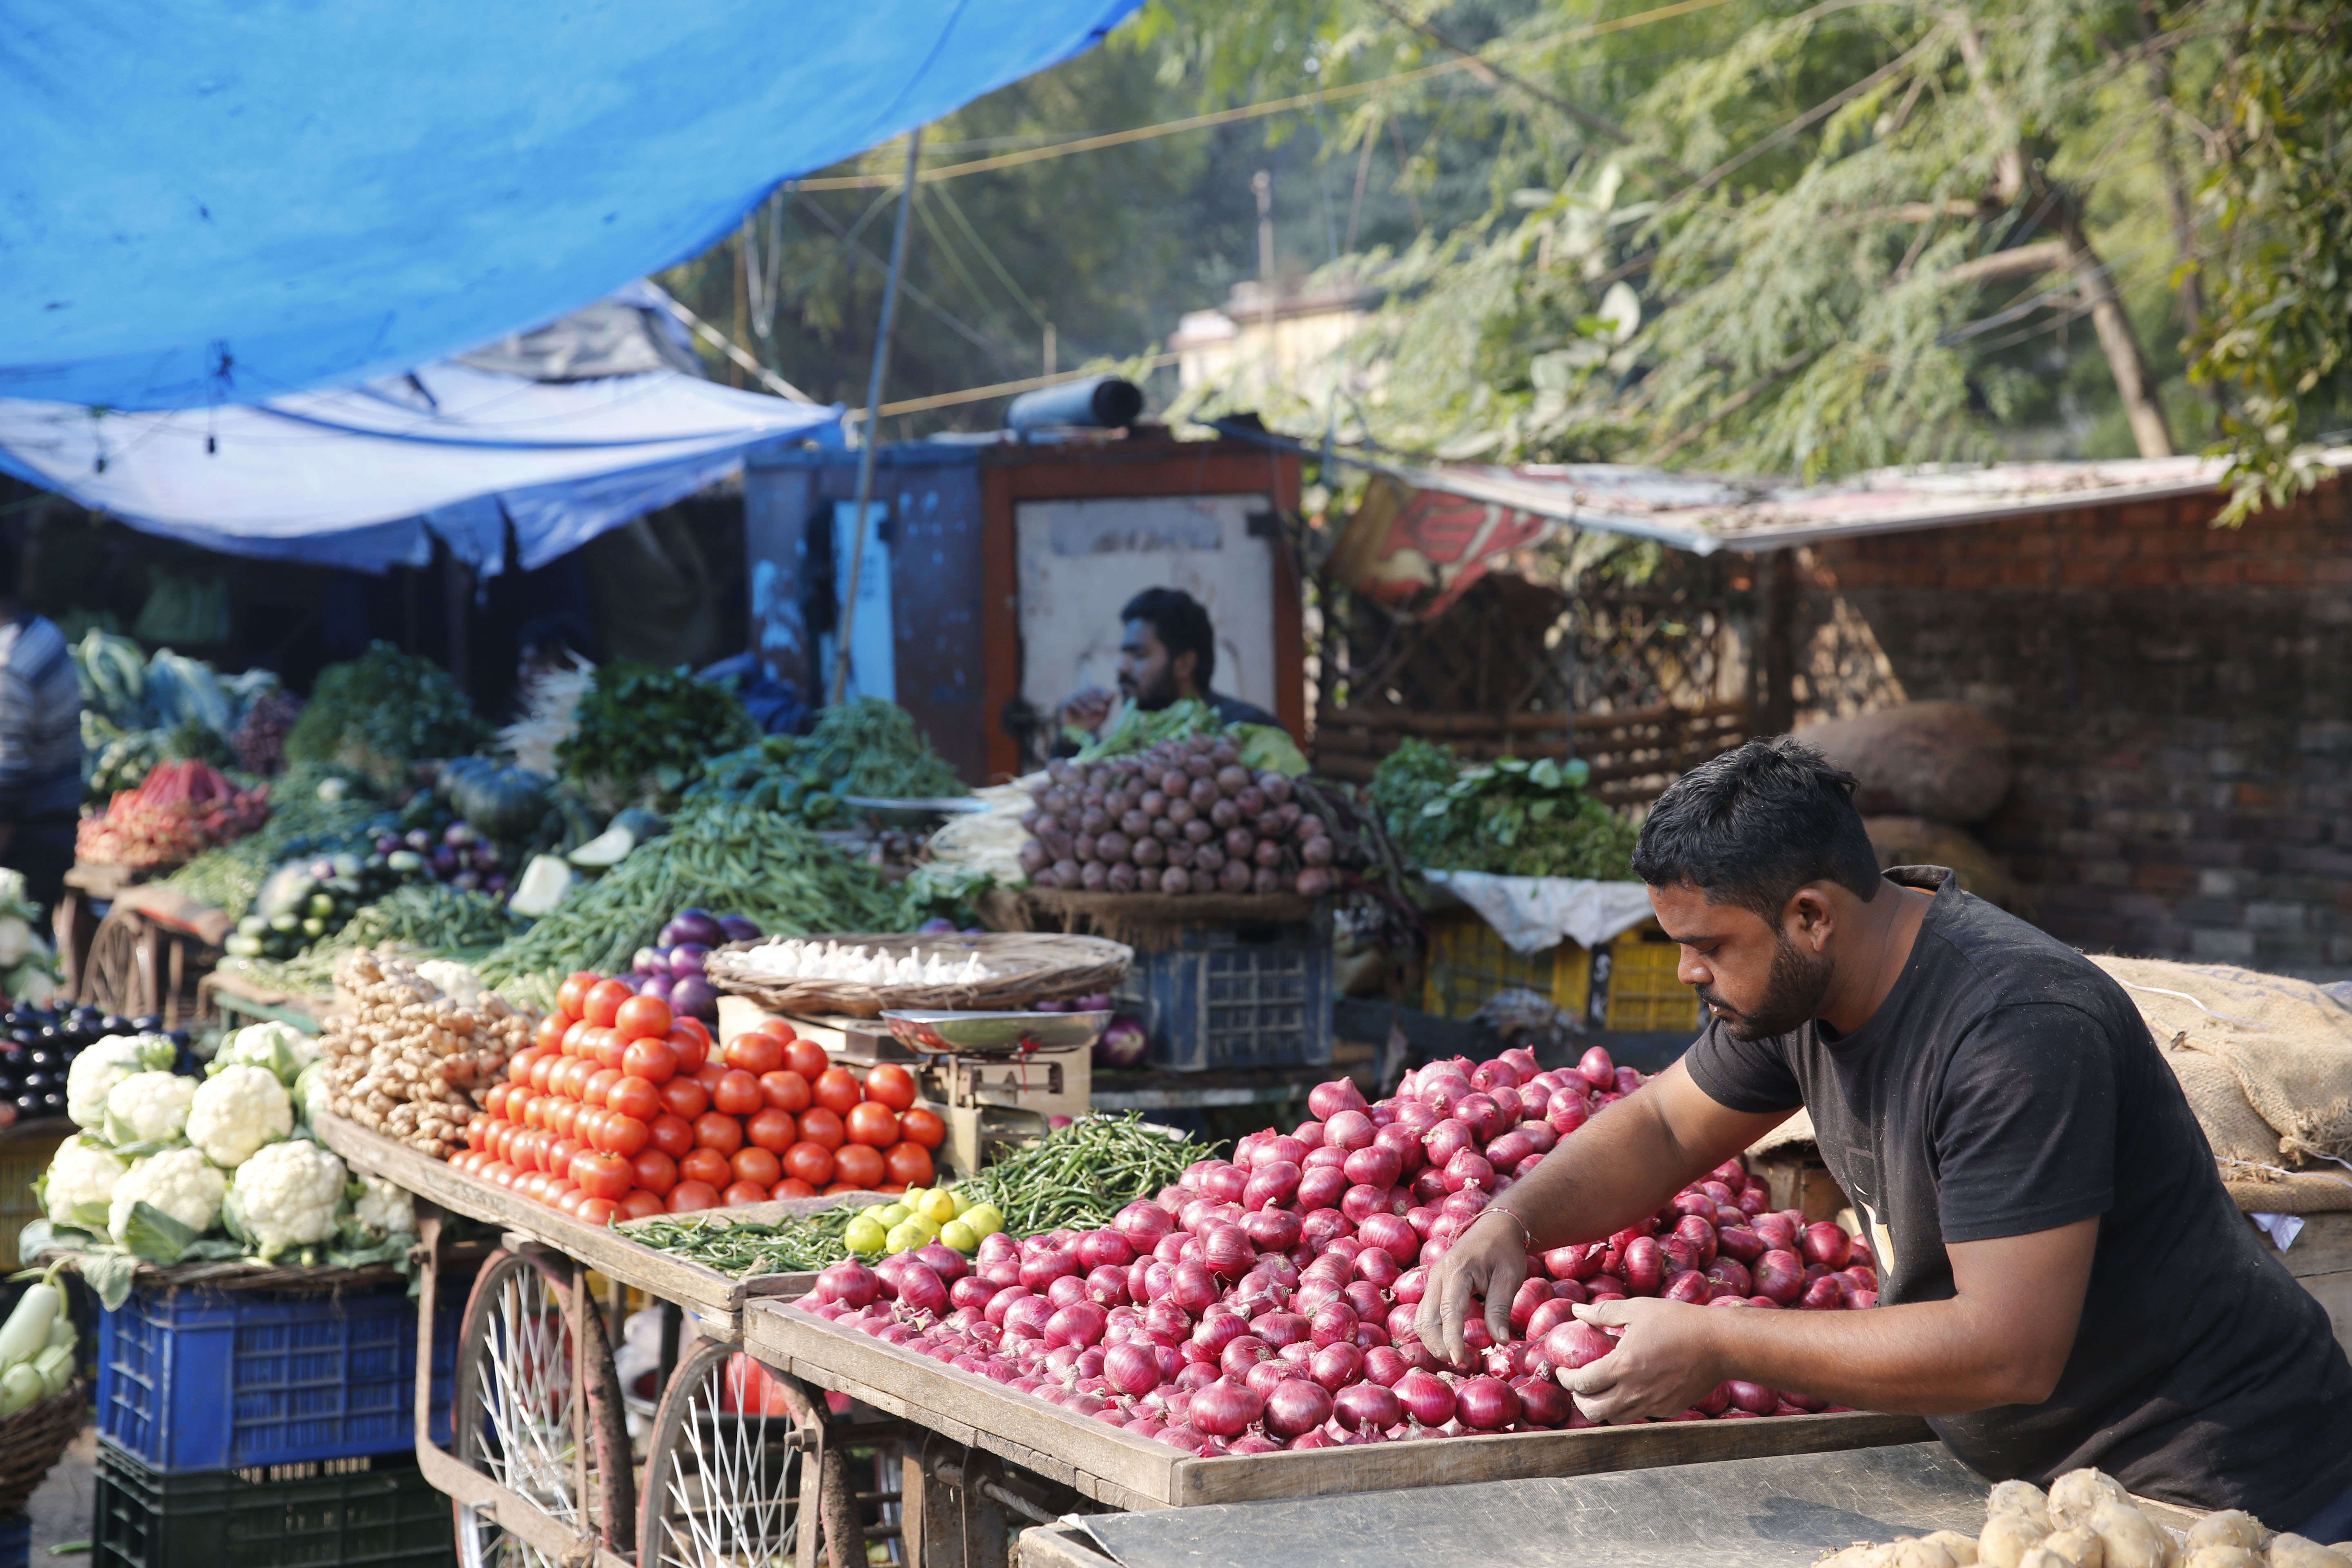 Food inflation remained in double digits at 13.6% in December